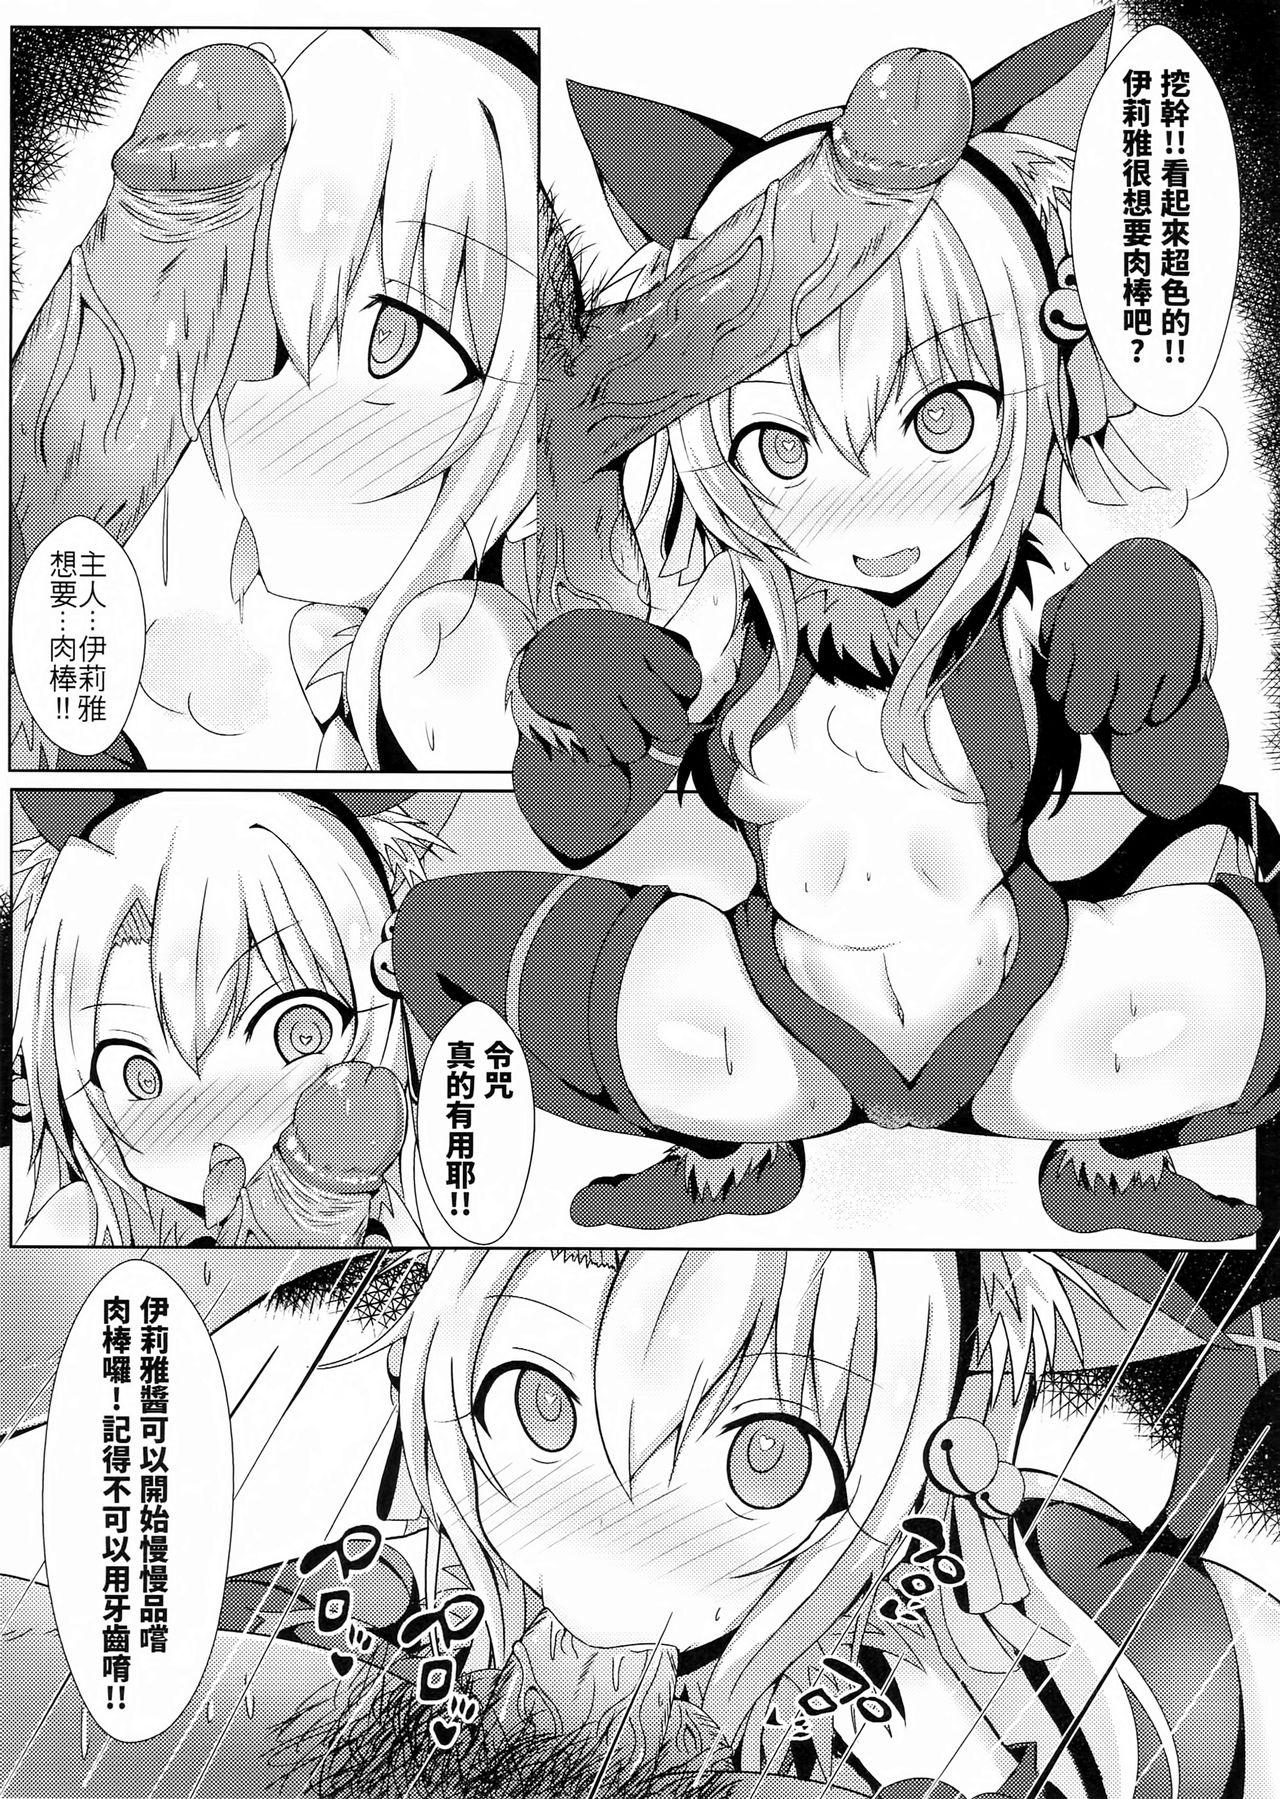 Trap 魔法公廁★伊利雅FUCK抽不到！！我什麼都沒有！！ - Fate grand order Exposed - Page 4